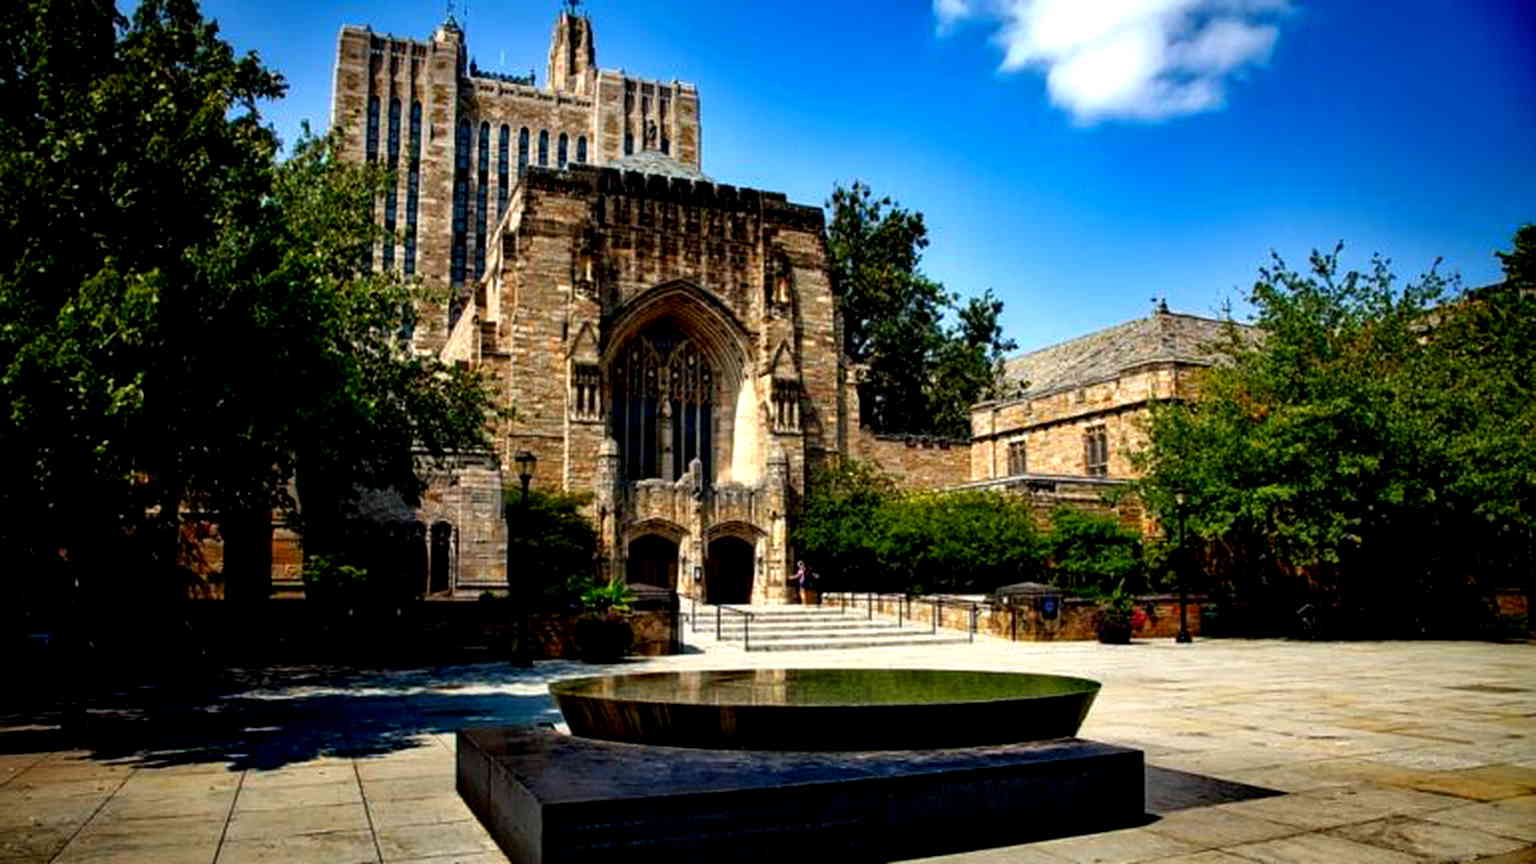 Most Fortune 500 CEOs did not attend Ivy League schools, data shows